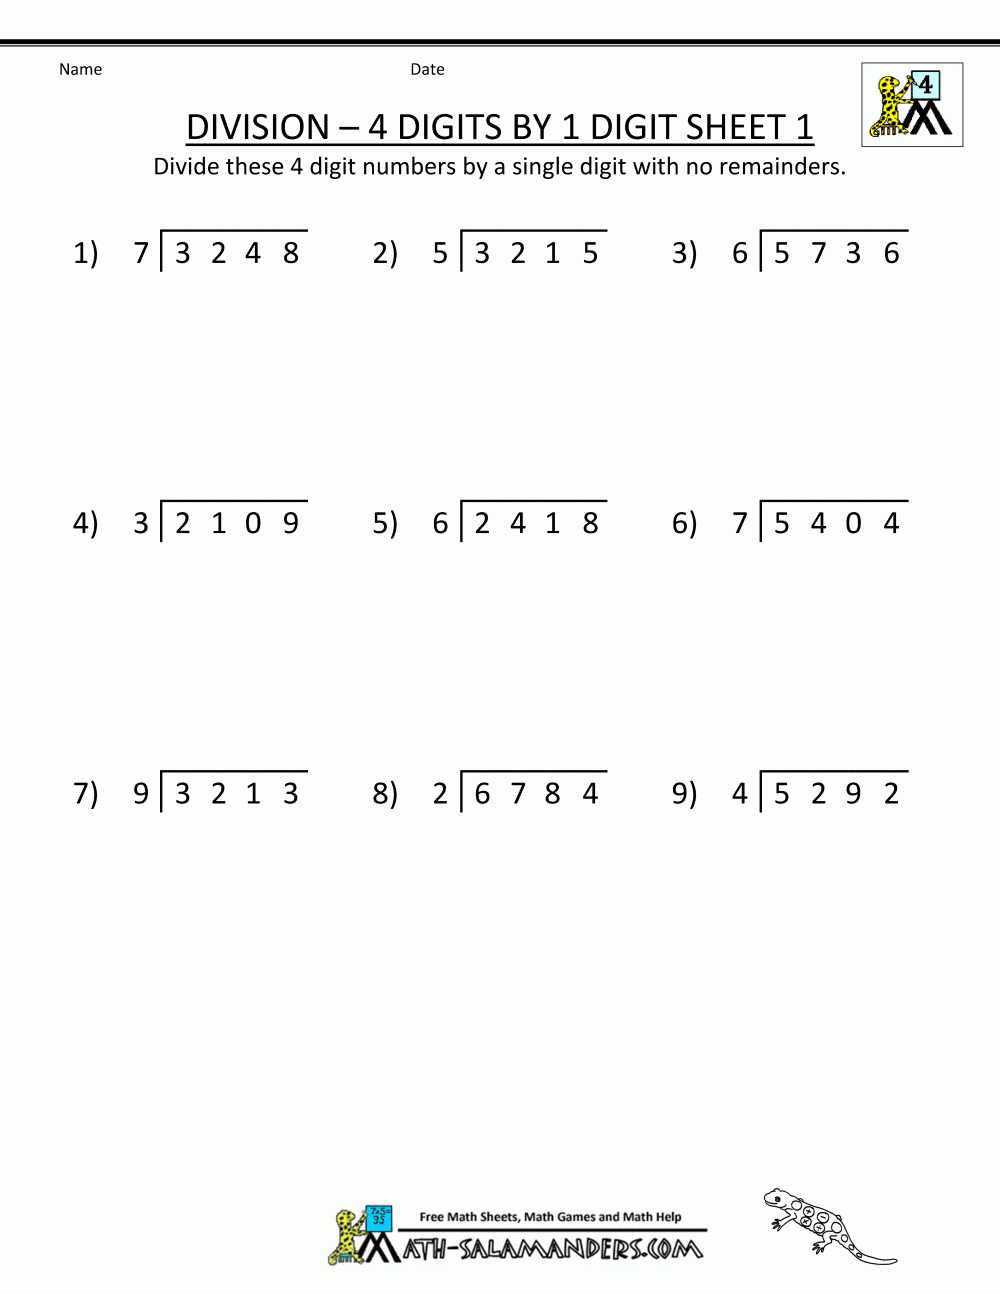 Long Division Worksheets 4 Digits1 Digit 1 | Projects To Try - Free Printable Long Division Worksheets 5Th Grade